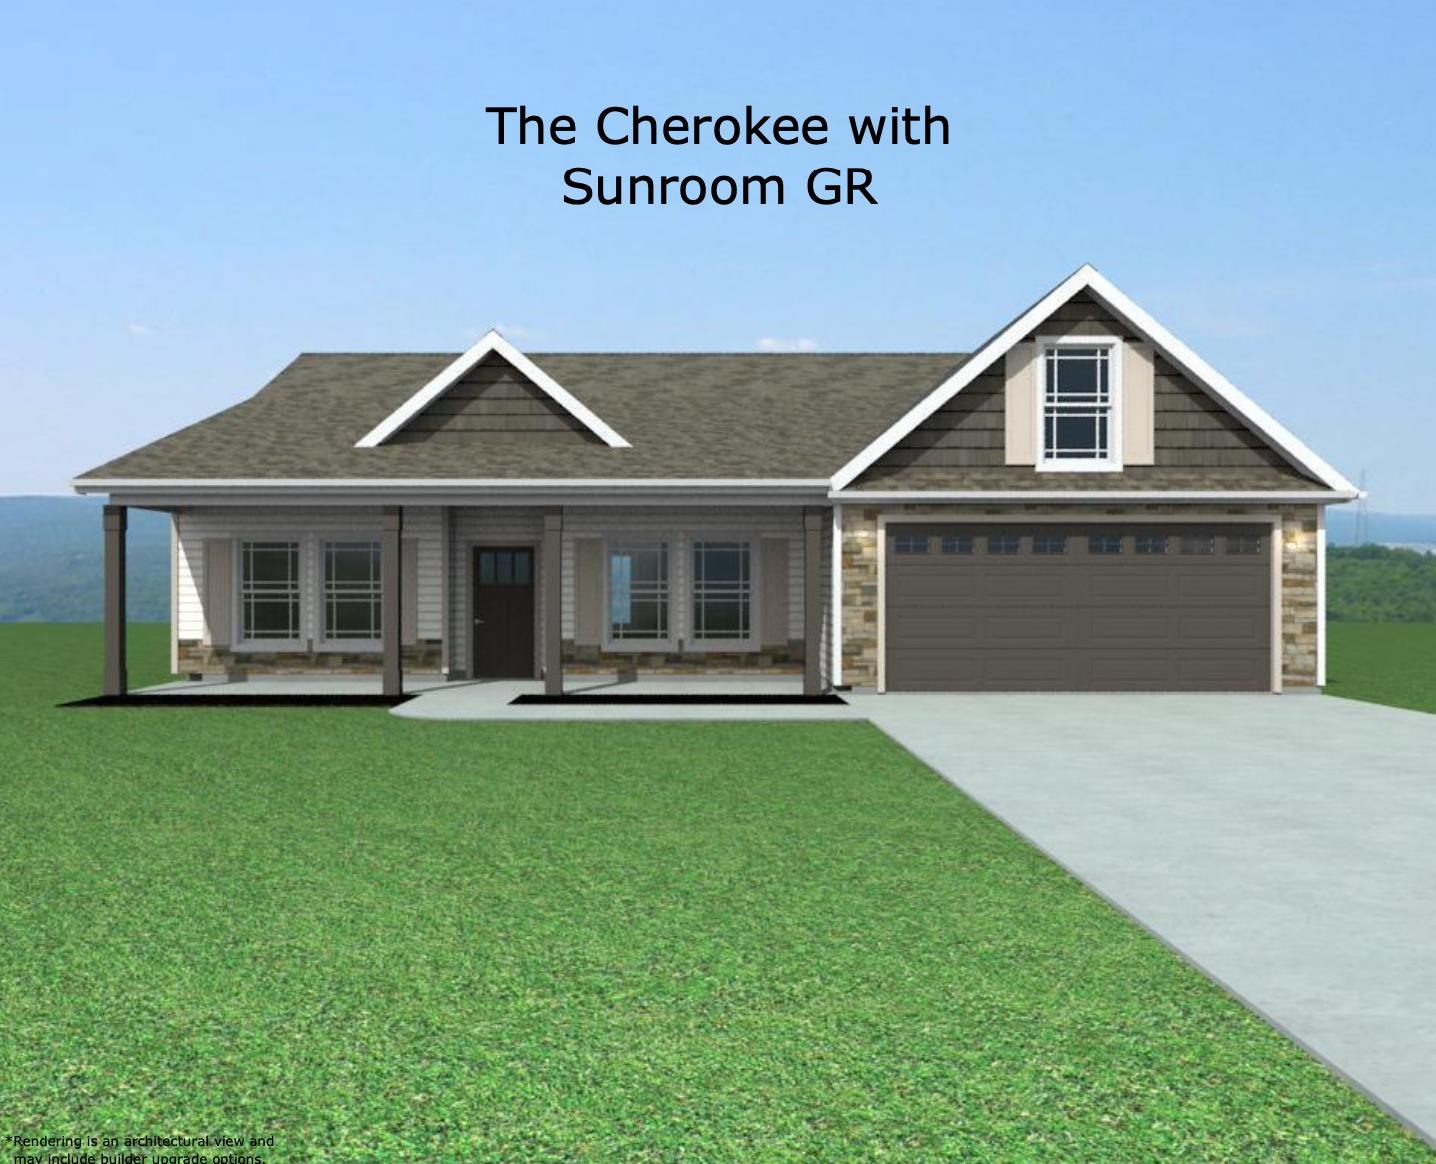 Welcome to the Cherokee!. This home will be complete with indirect lighting, painted cabinets, and granite countertops. LVP flooring everywhere expect bedrooms and study! Open concept floor plan with corner fireplace. Upgraded patio option includes 12x12 Sunroom off main living area with 10x12 uncovered patio. Home is under construction with completion estimated for summer 2024. Contact agent to set up your showing today! Preferred Lender/Attorney Interest Rate Incentive Offered!  Conveniently located to Landrum, Campobello, Boiling Springs, and Chesnee, SC as well as Hendersonville, NC! *GPS Address: 4675 Melvin Hill Rd. Columbus, NC 28722* Buyer's agent to verify sqft.